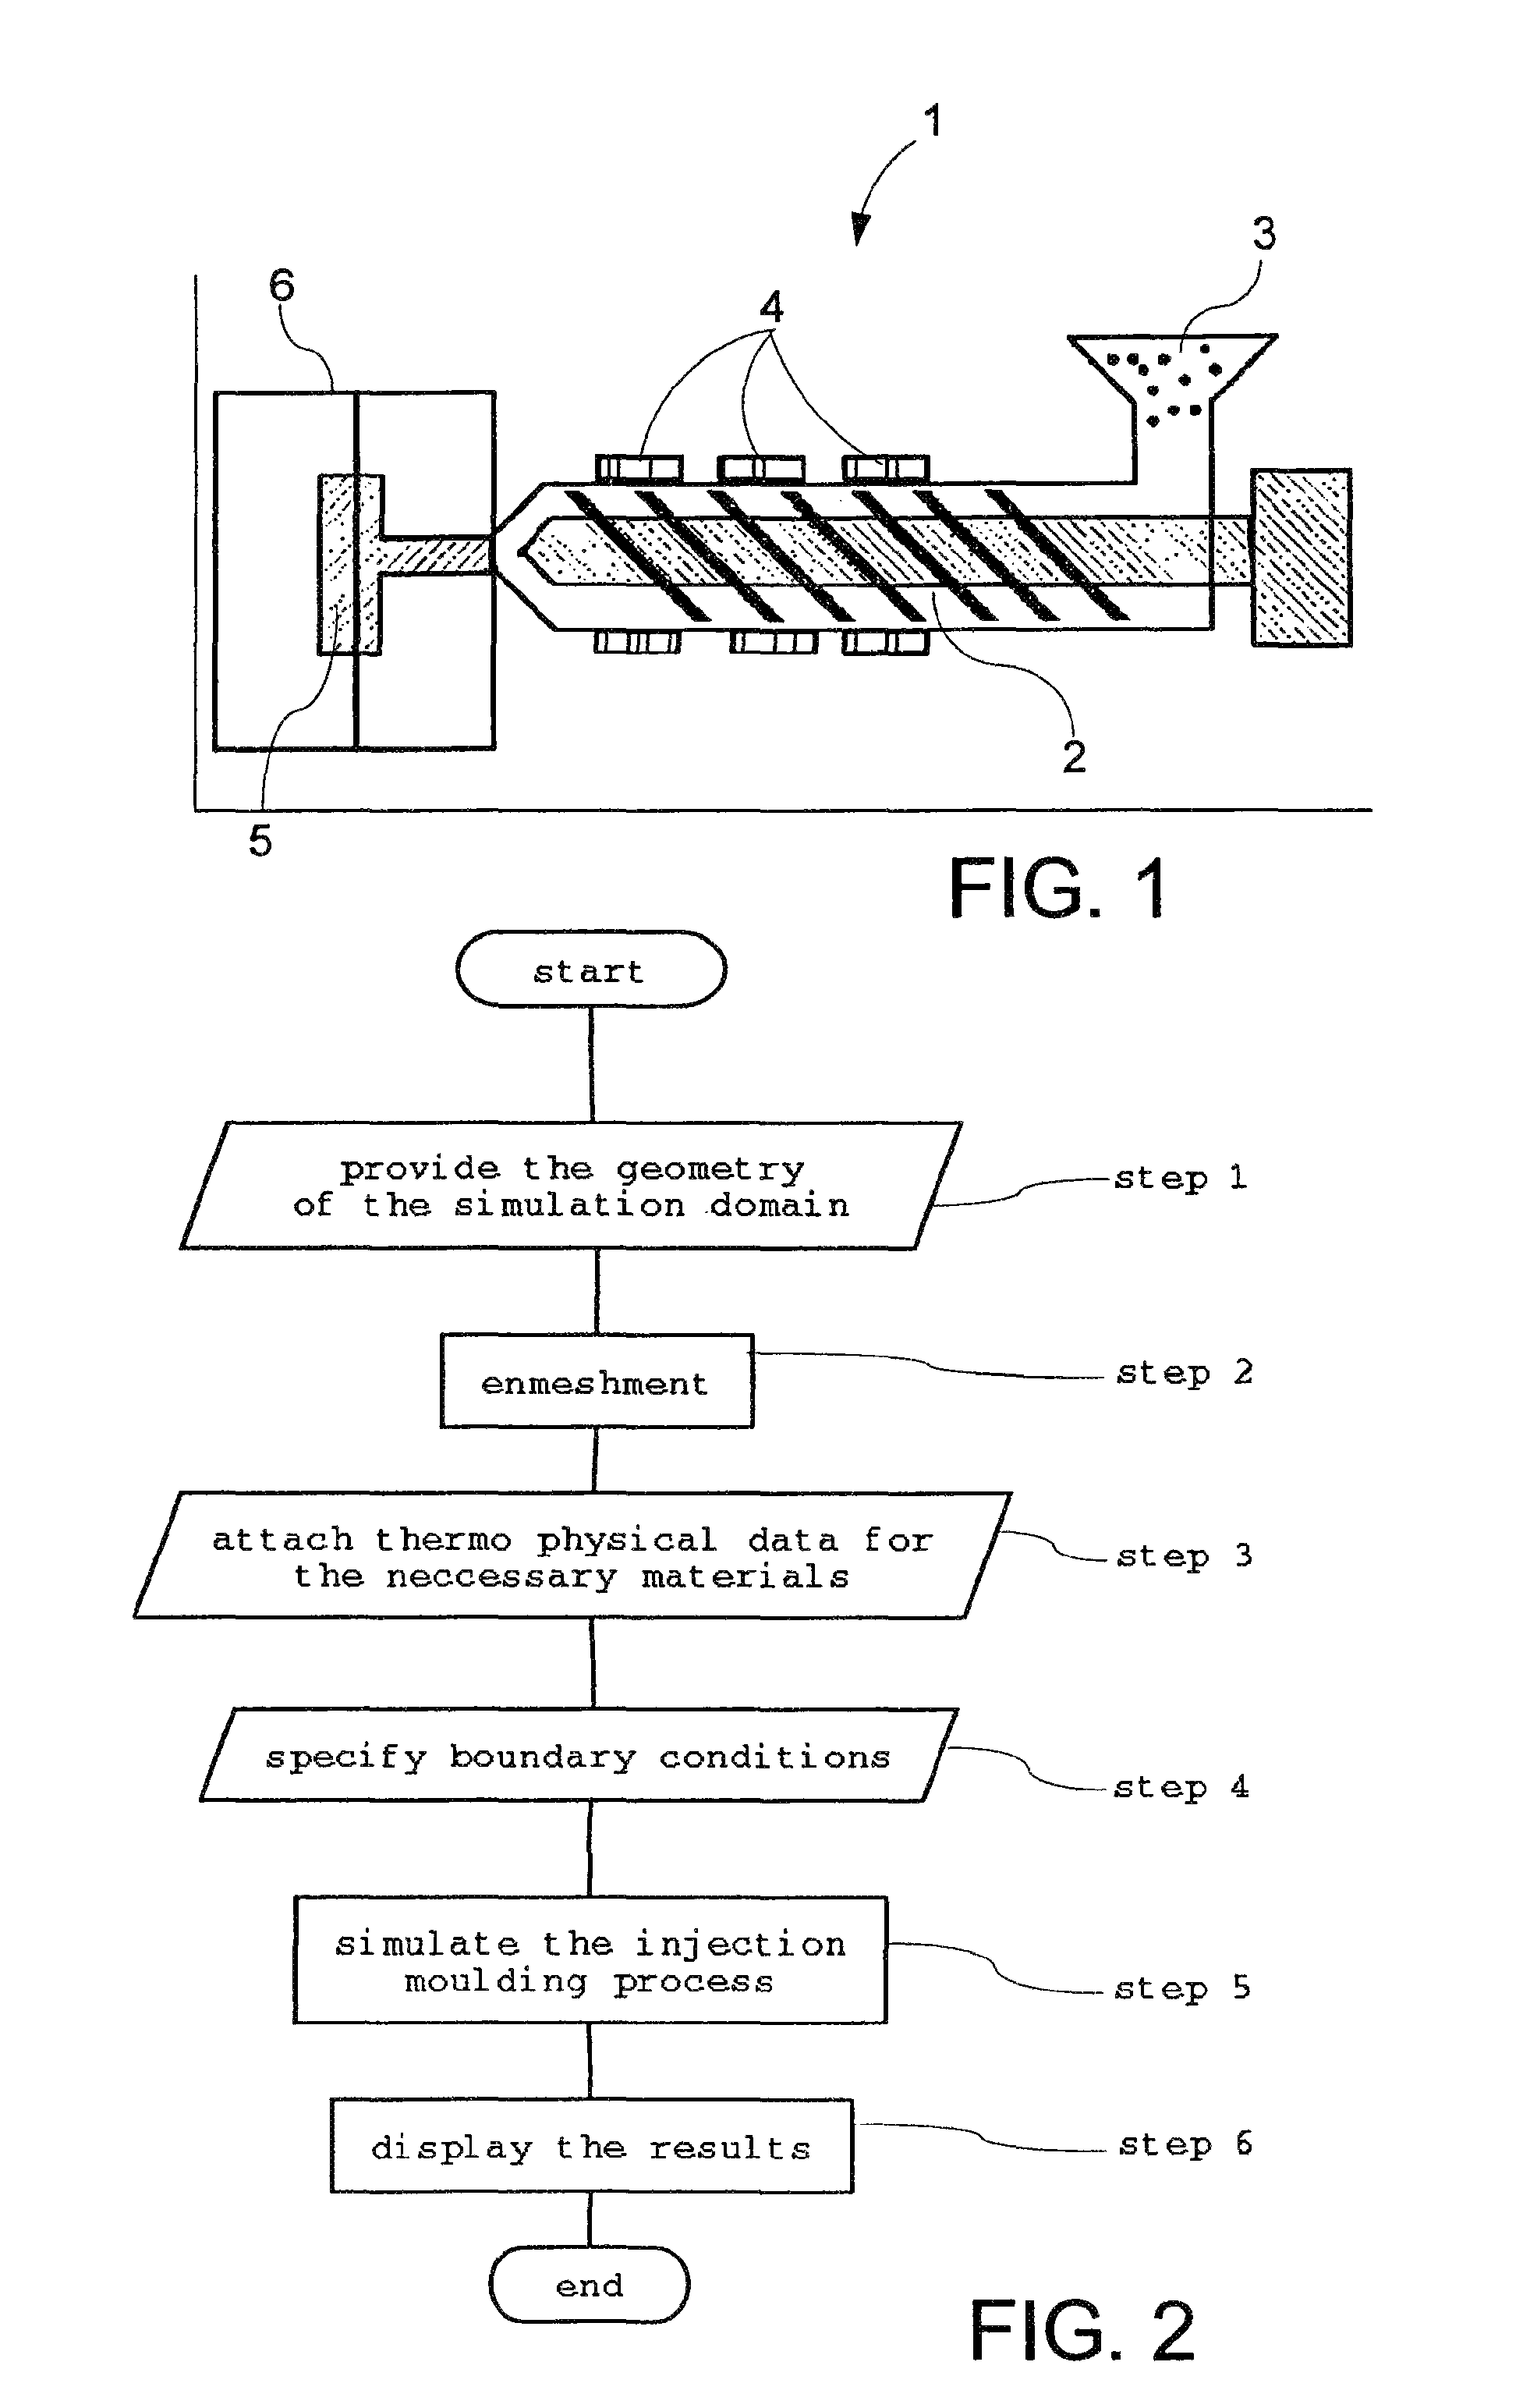 Method and apparatus for describing the statistical orientation distribution of particles in a simulation of a mould filling process